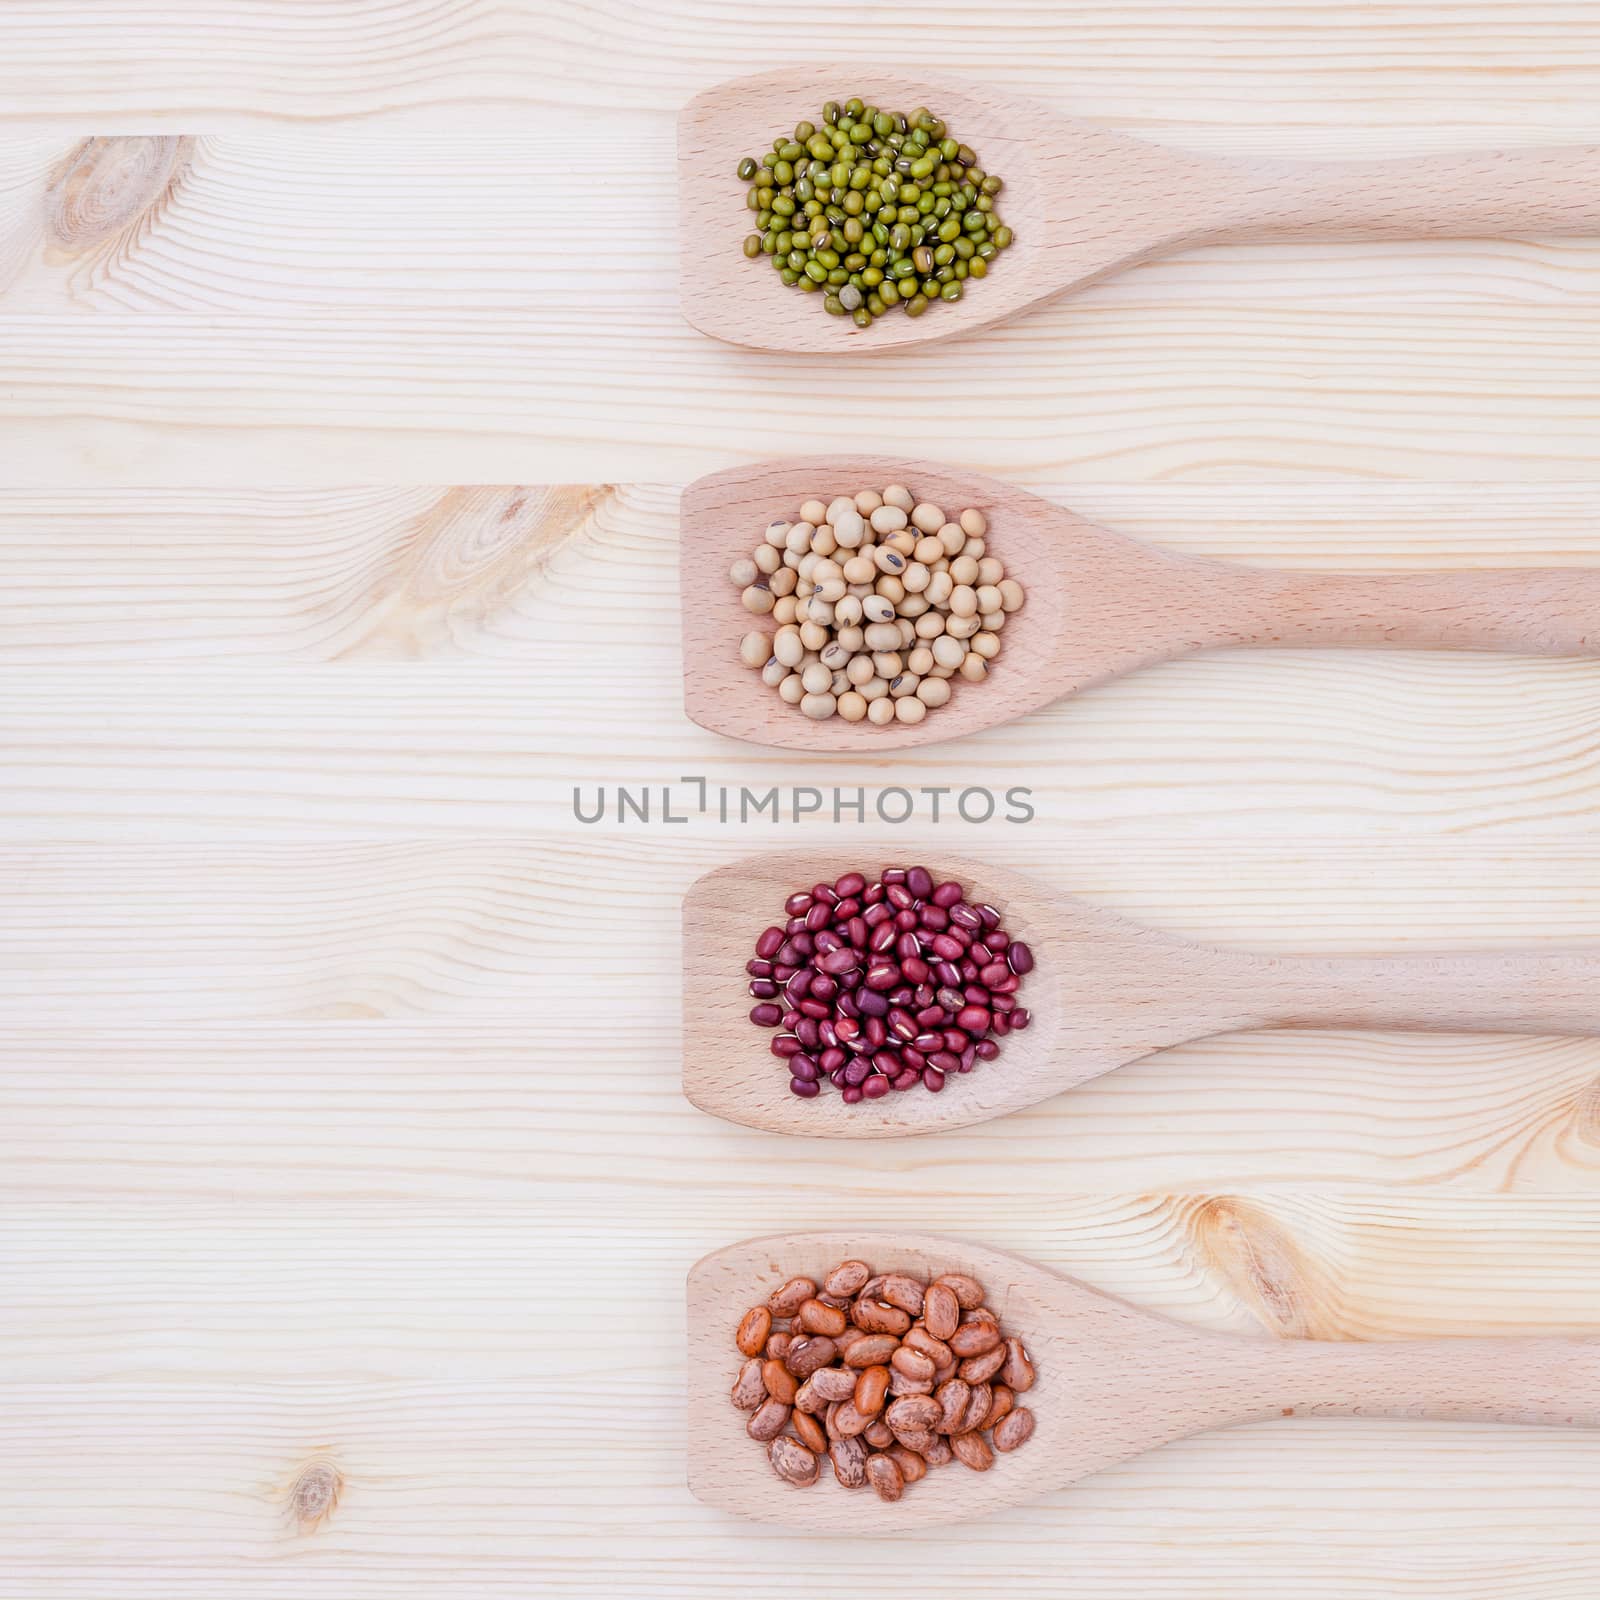 Assortment of beans and lentils in wooden spoon on wooden background.  soybean, mung bean , red bean and brown pinto beans .